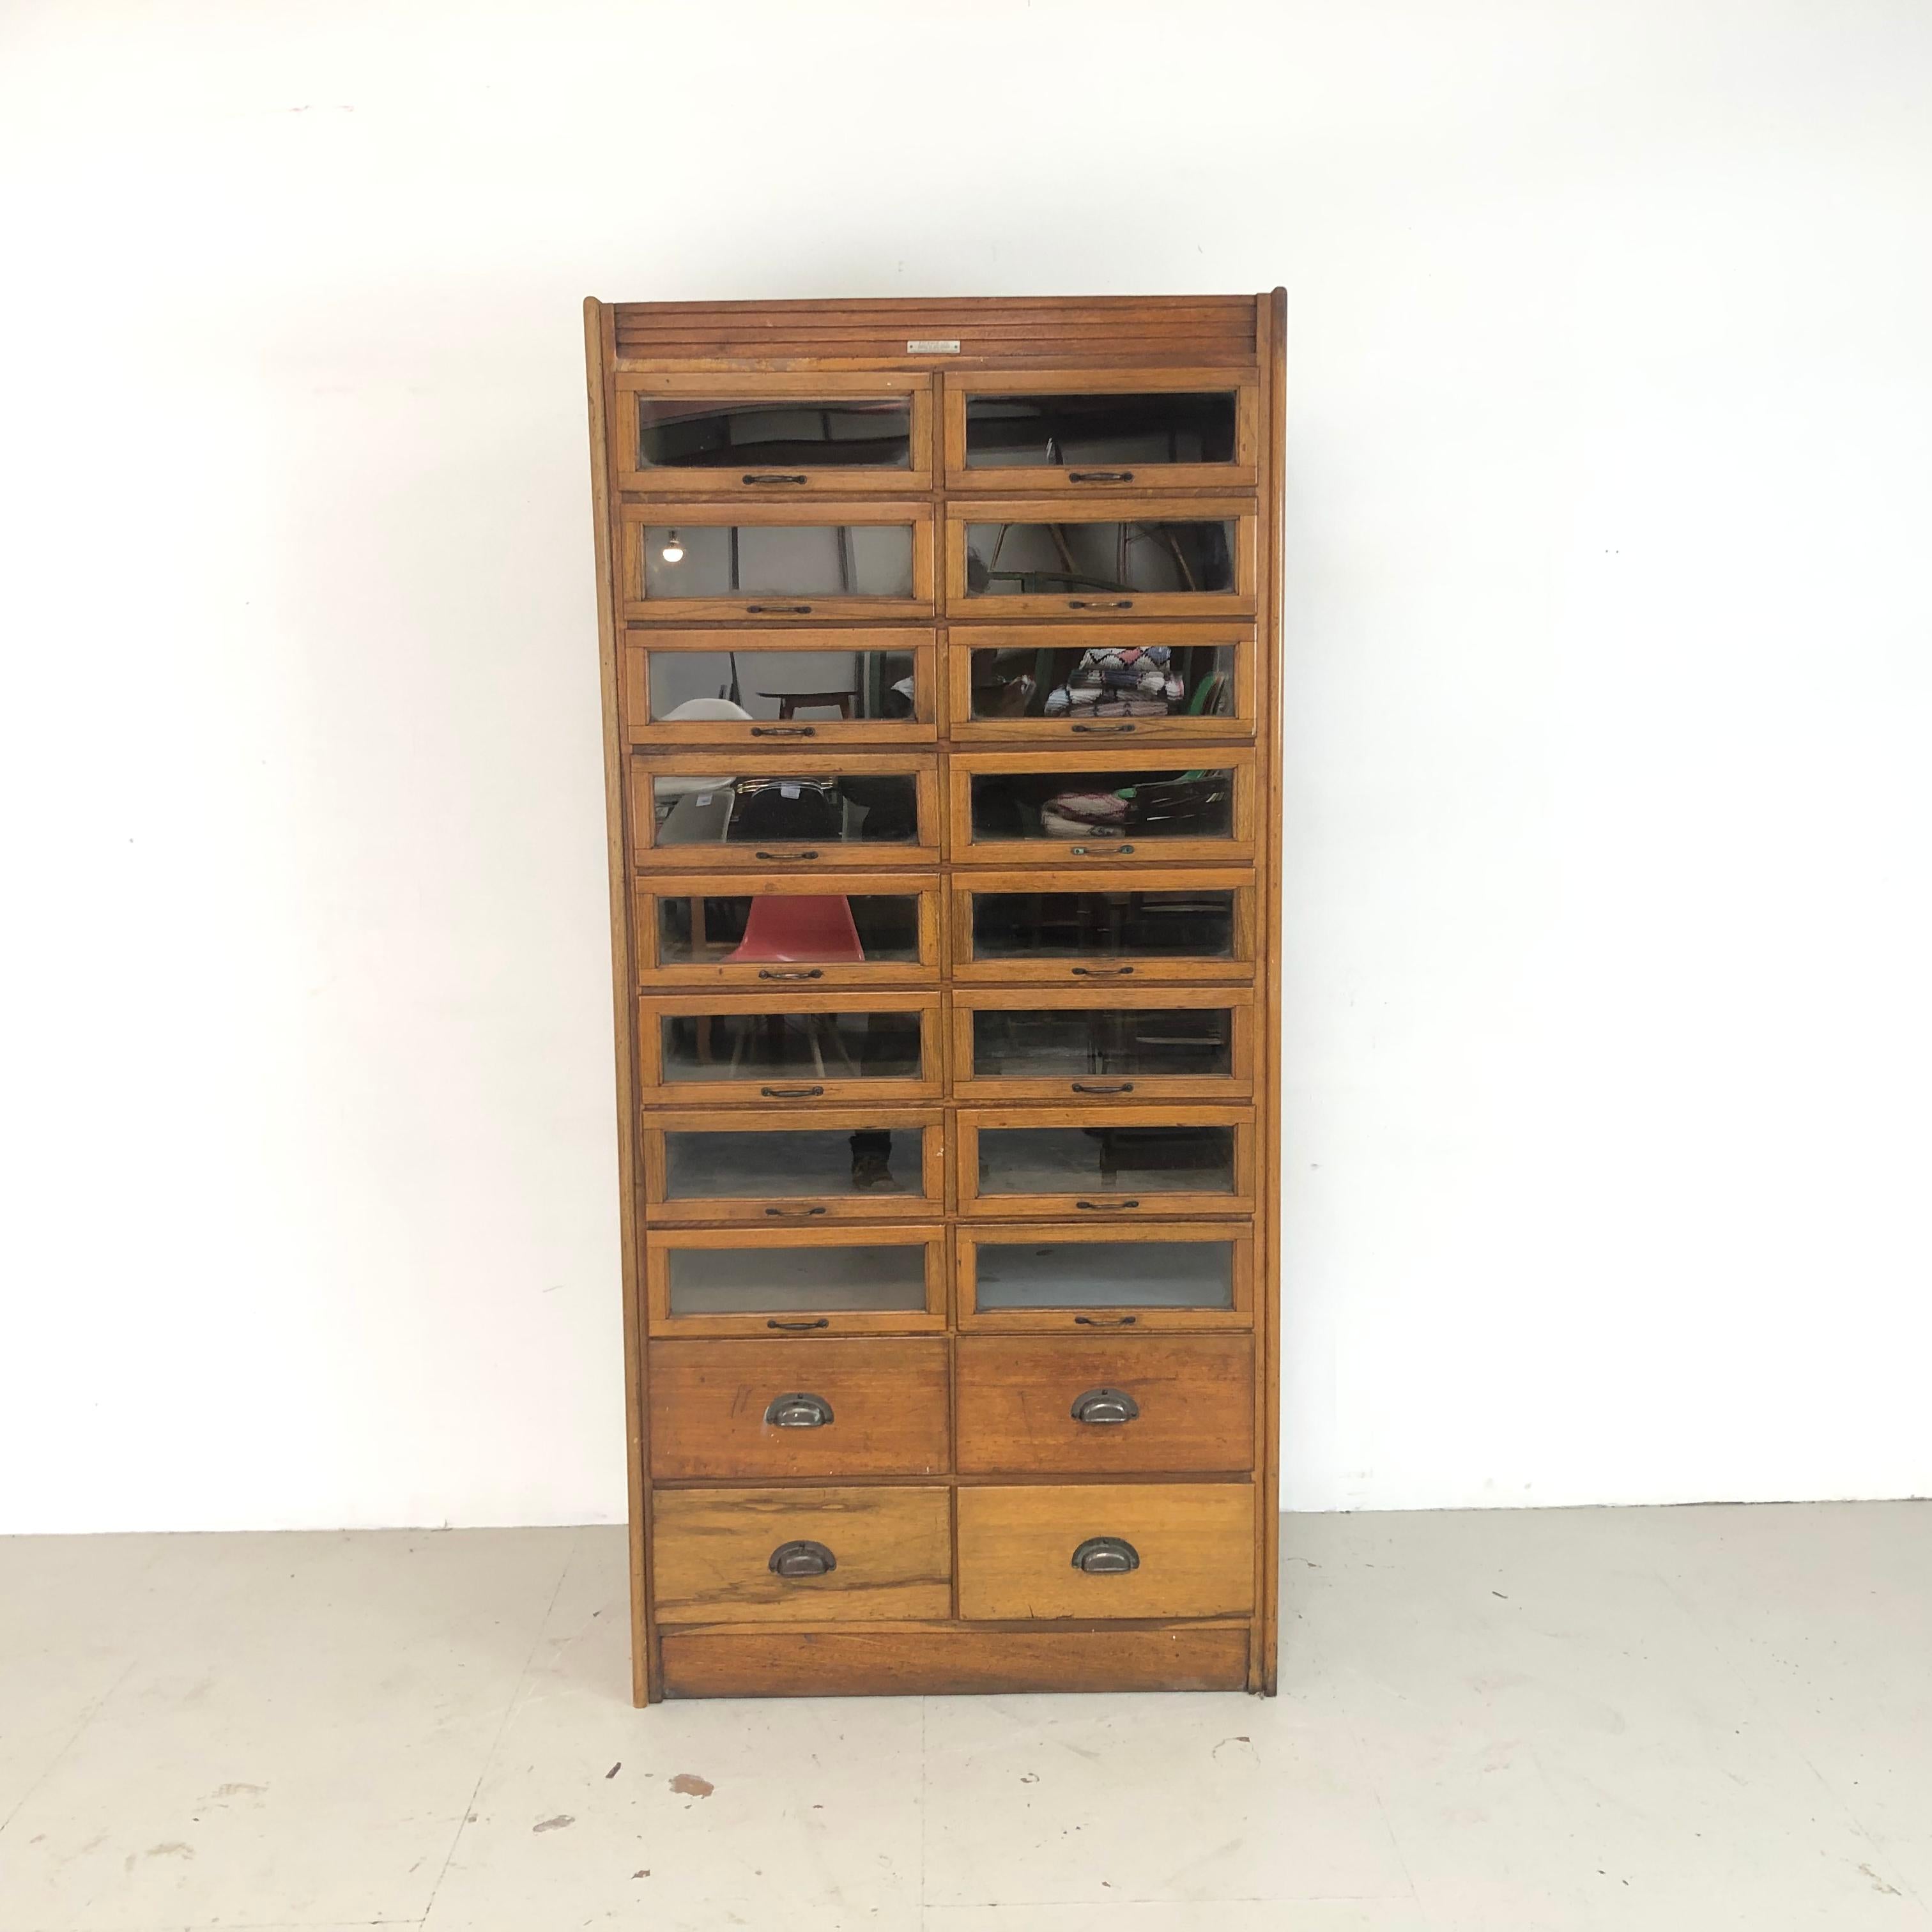 Really lovely vintage 20-drawer haberdashery shop cabinet from the 1920s with brass handles and panelled sides. Made by J C King.

In good vintage condition. Some scuffs here and there, commensurate with age, and signs of historical woodworm which